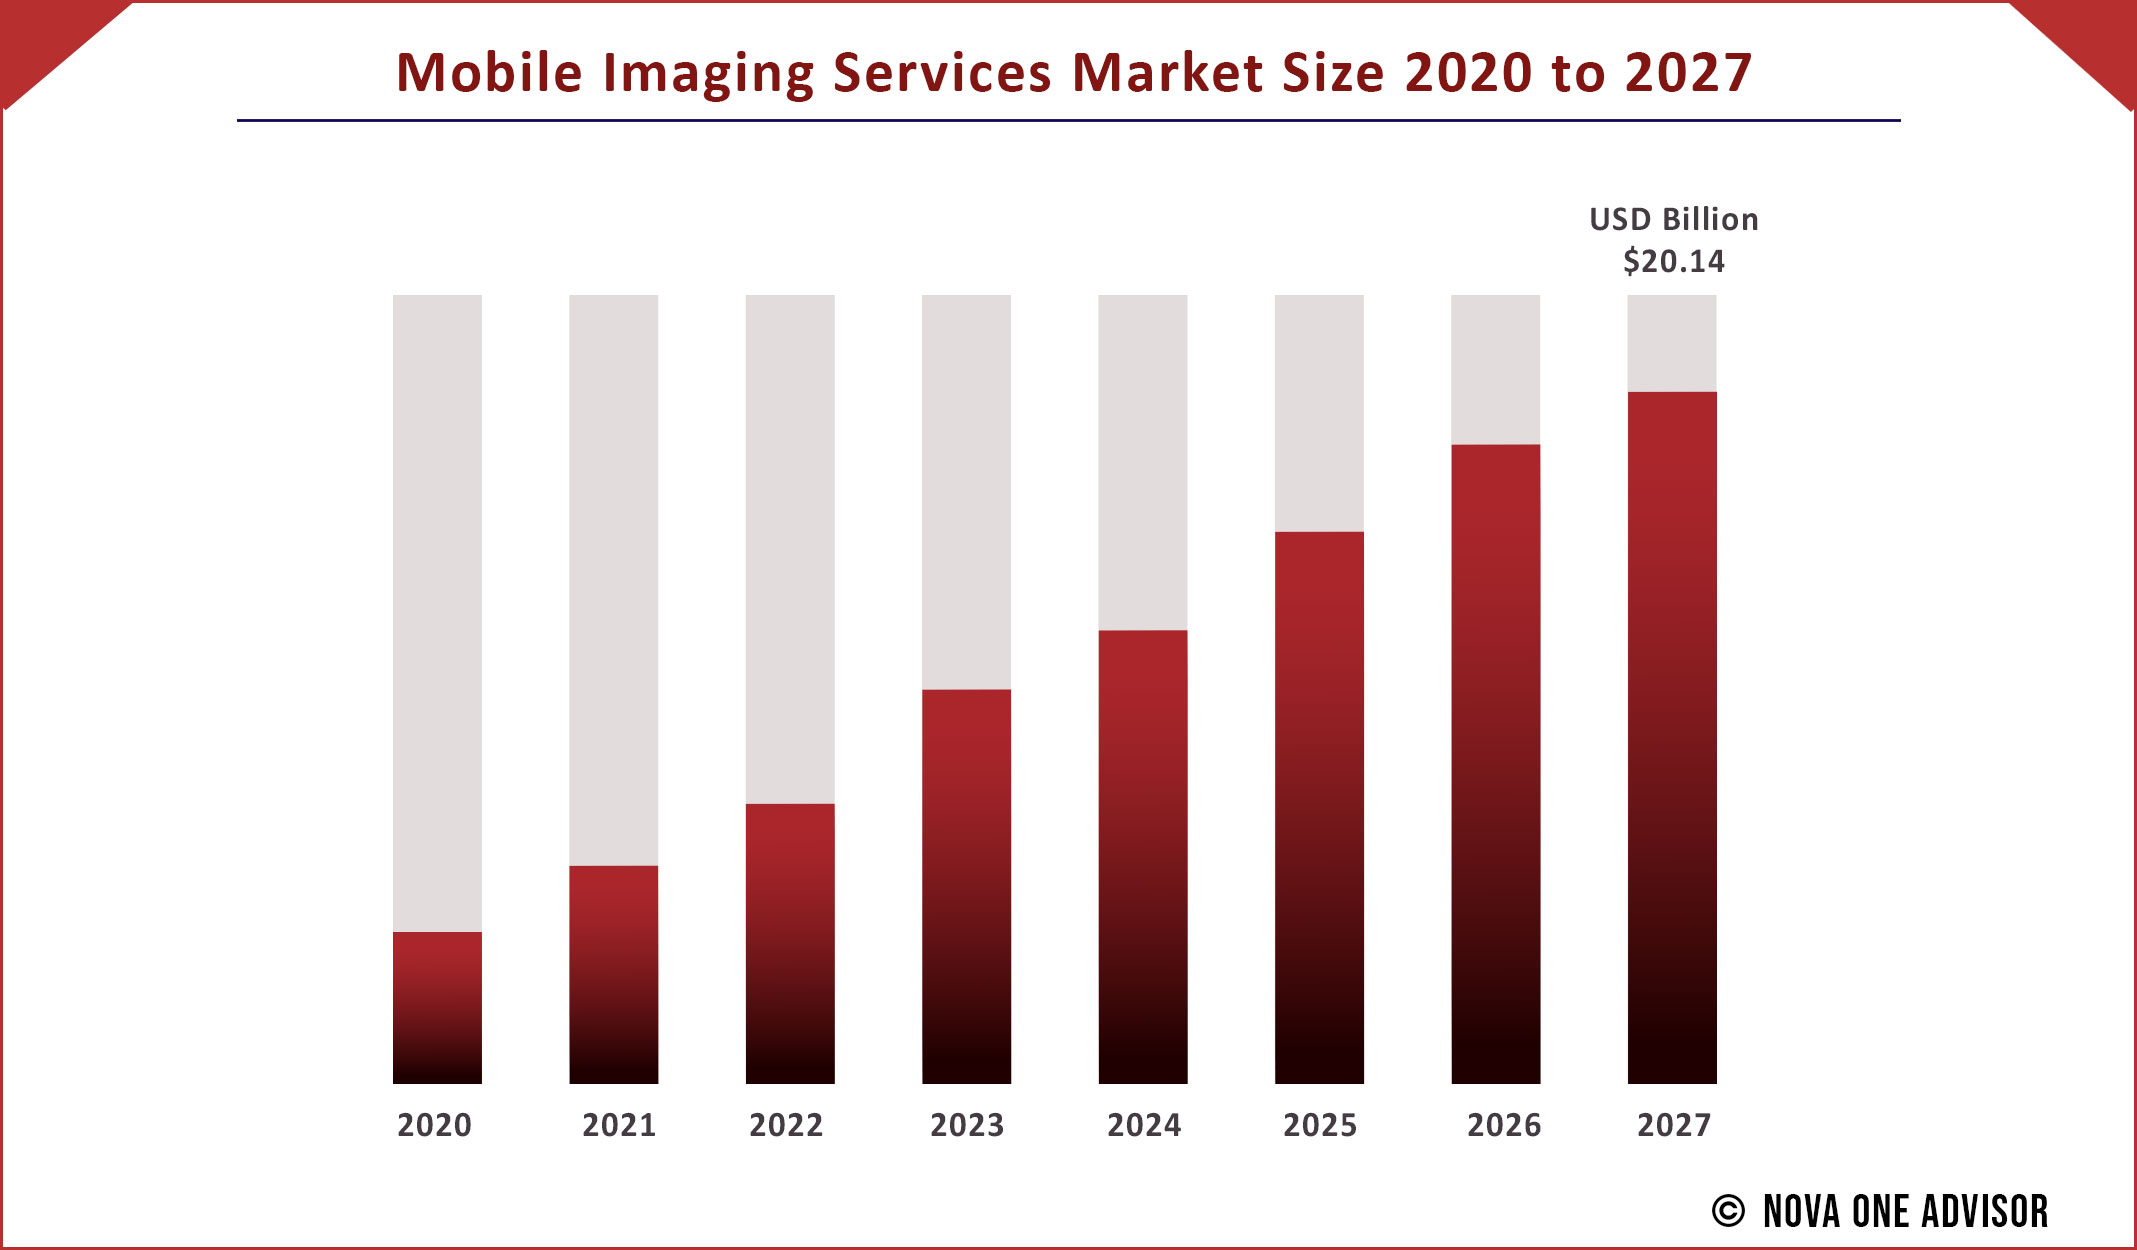 Mobile Imaging Services Market Size 2020 to 2027